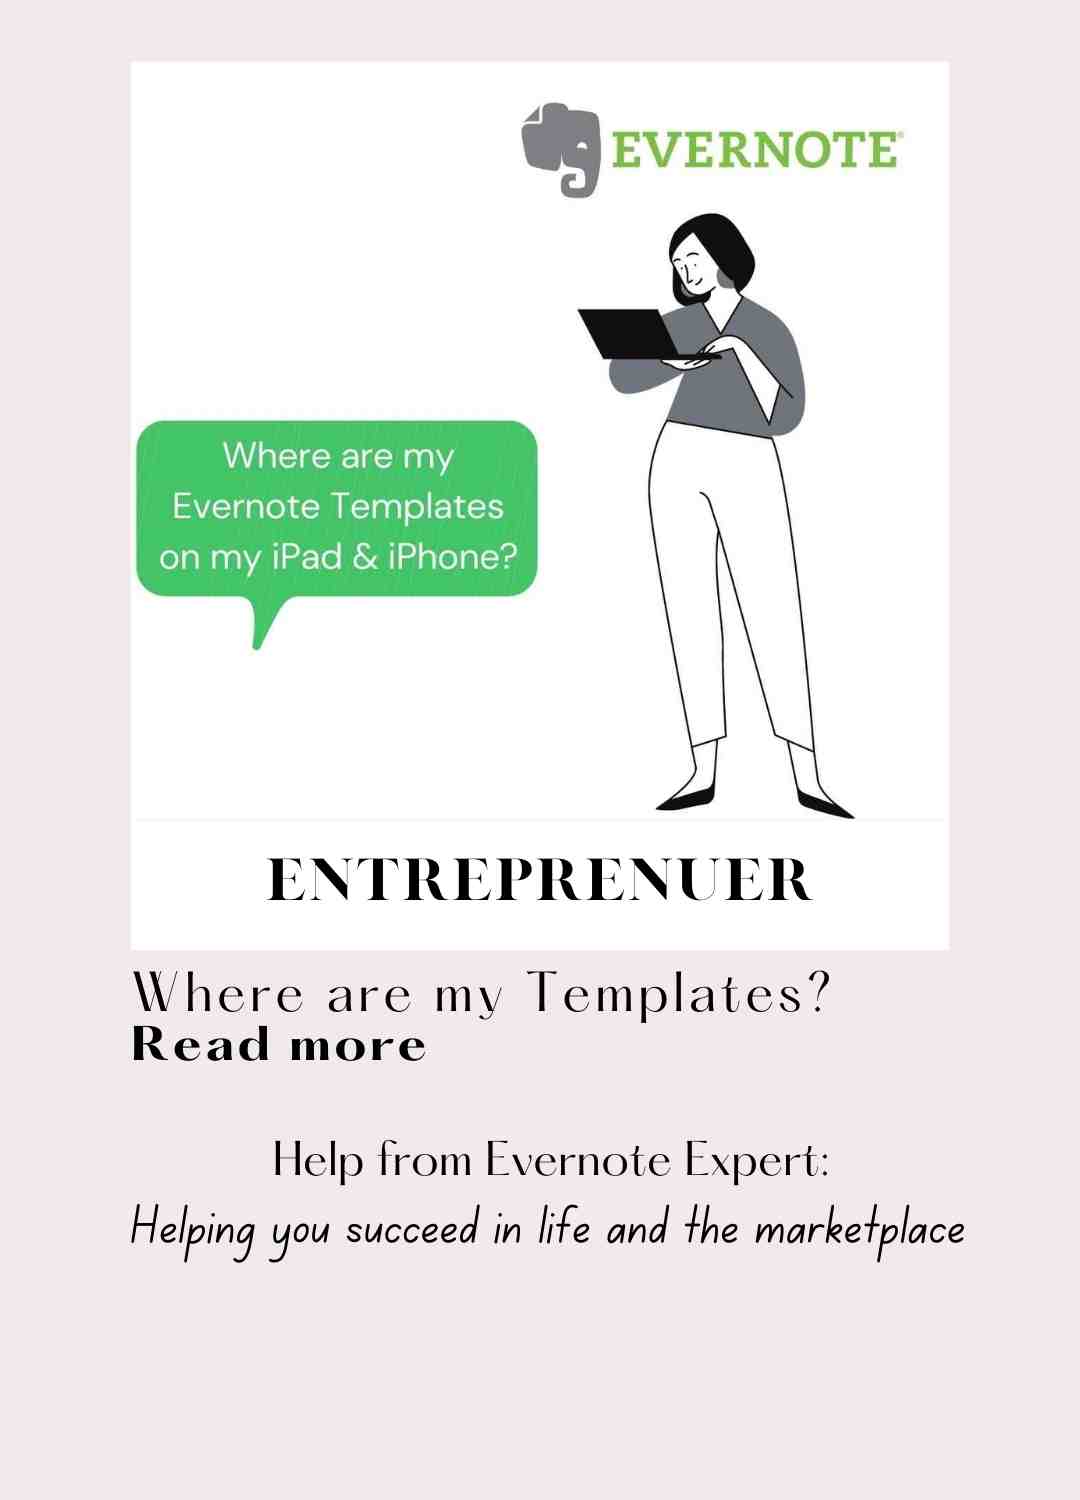 WHERE are my Evernote Templates on my iOS device 